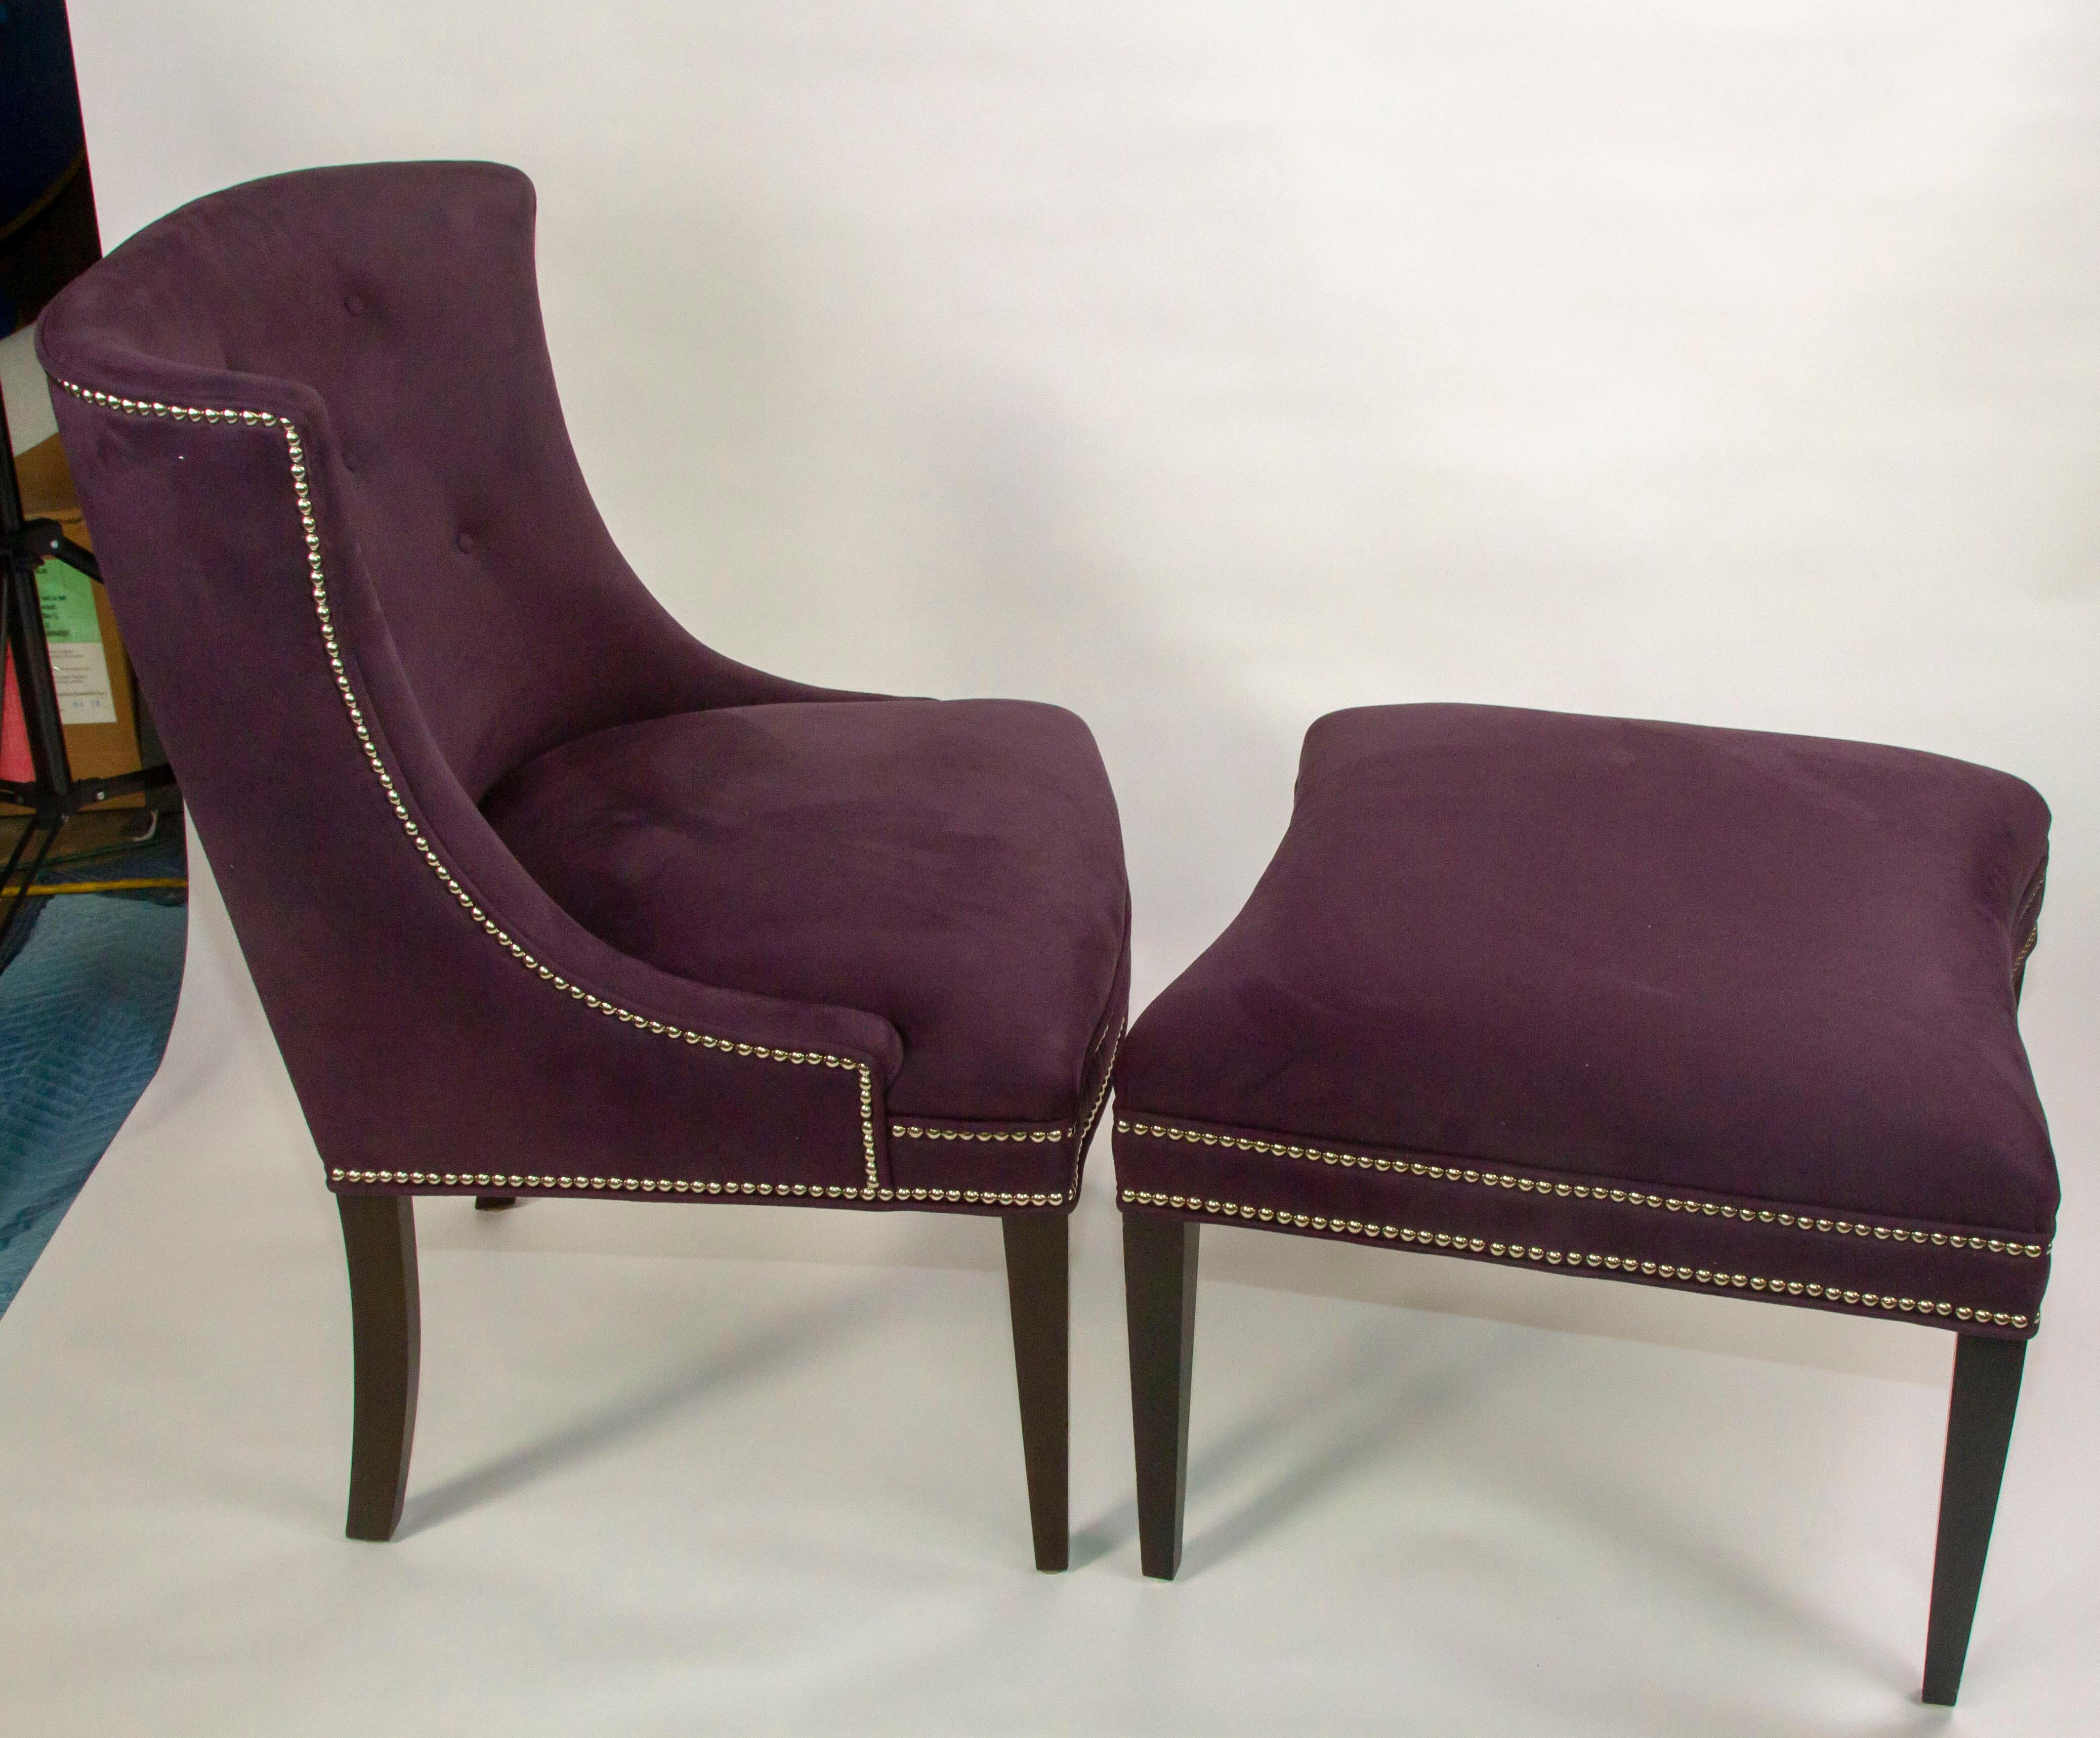 Woodwork Pair of  Chairs and matching Ottoman,  Iconic Duchesse Brisee For Sale